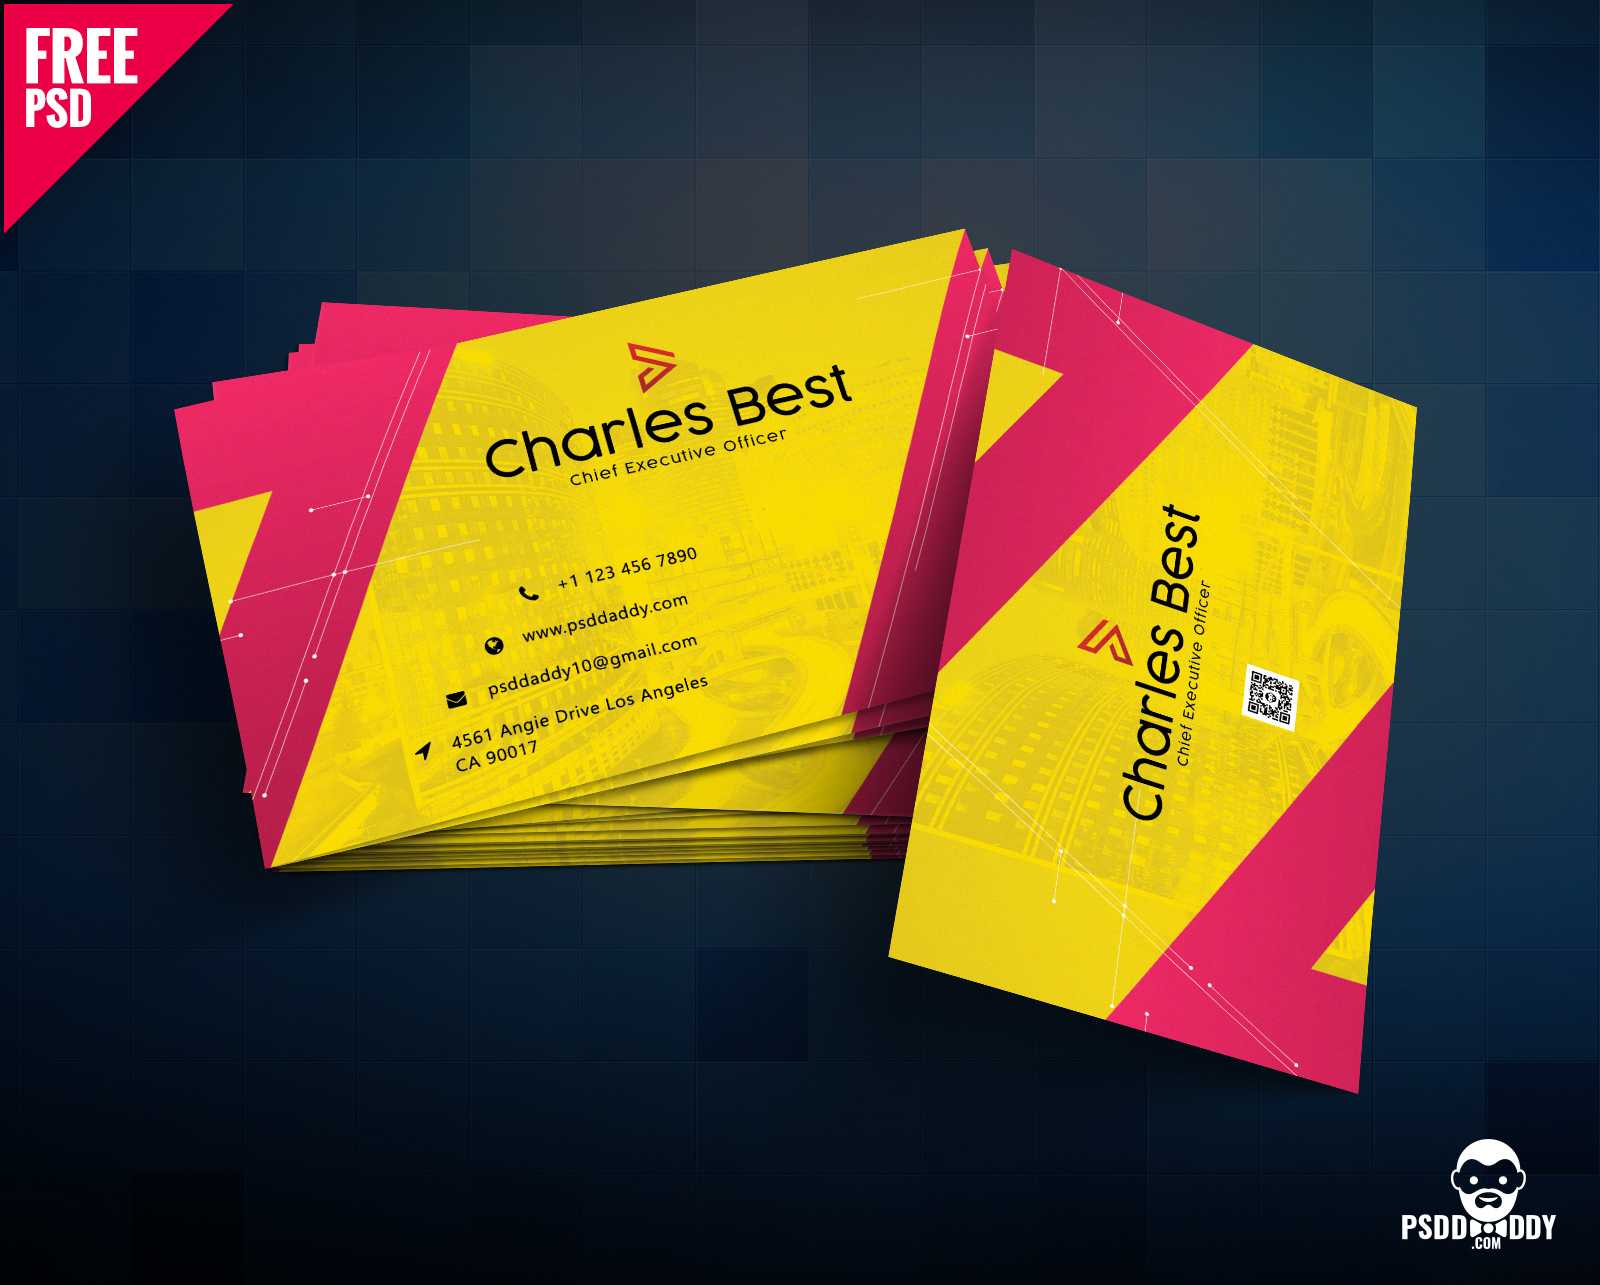 Download] Creative Business Card Free Psd | Psddaddy In Photoshop Name Card Template